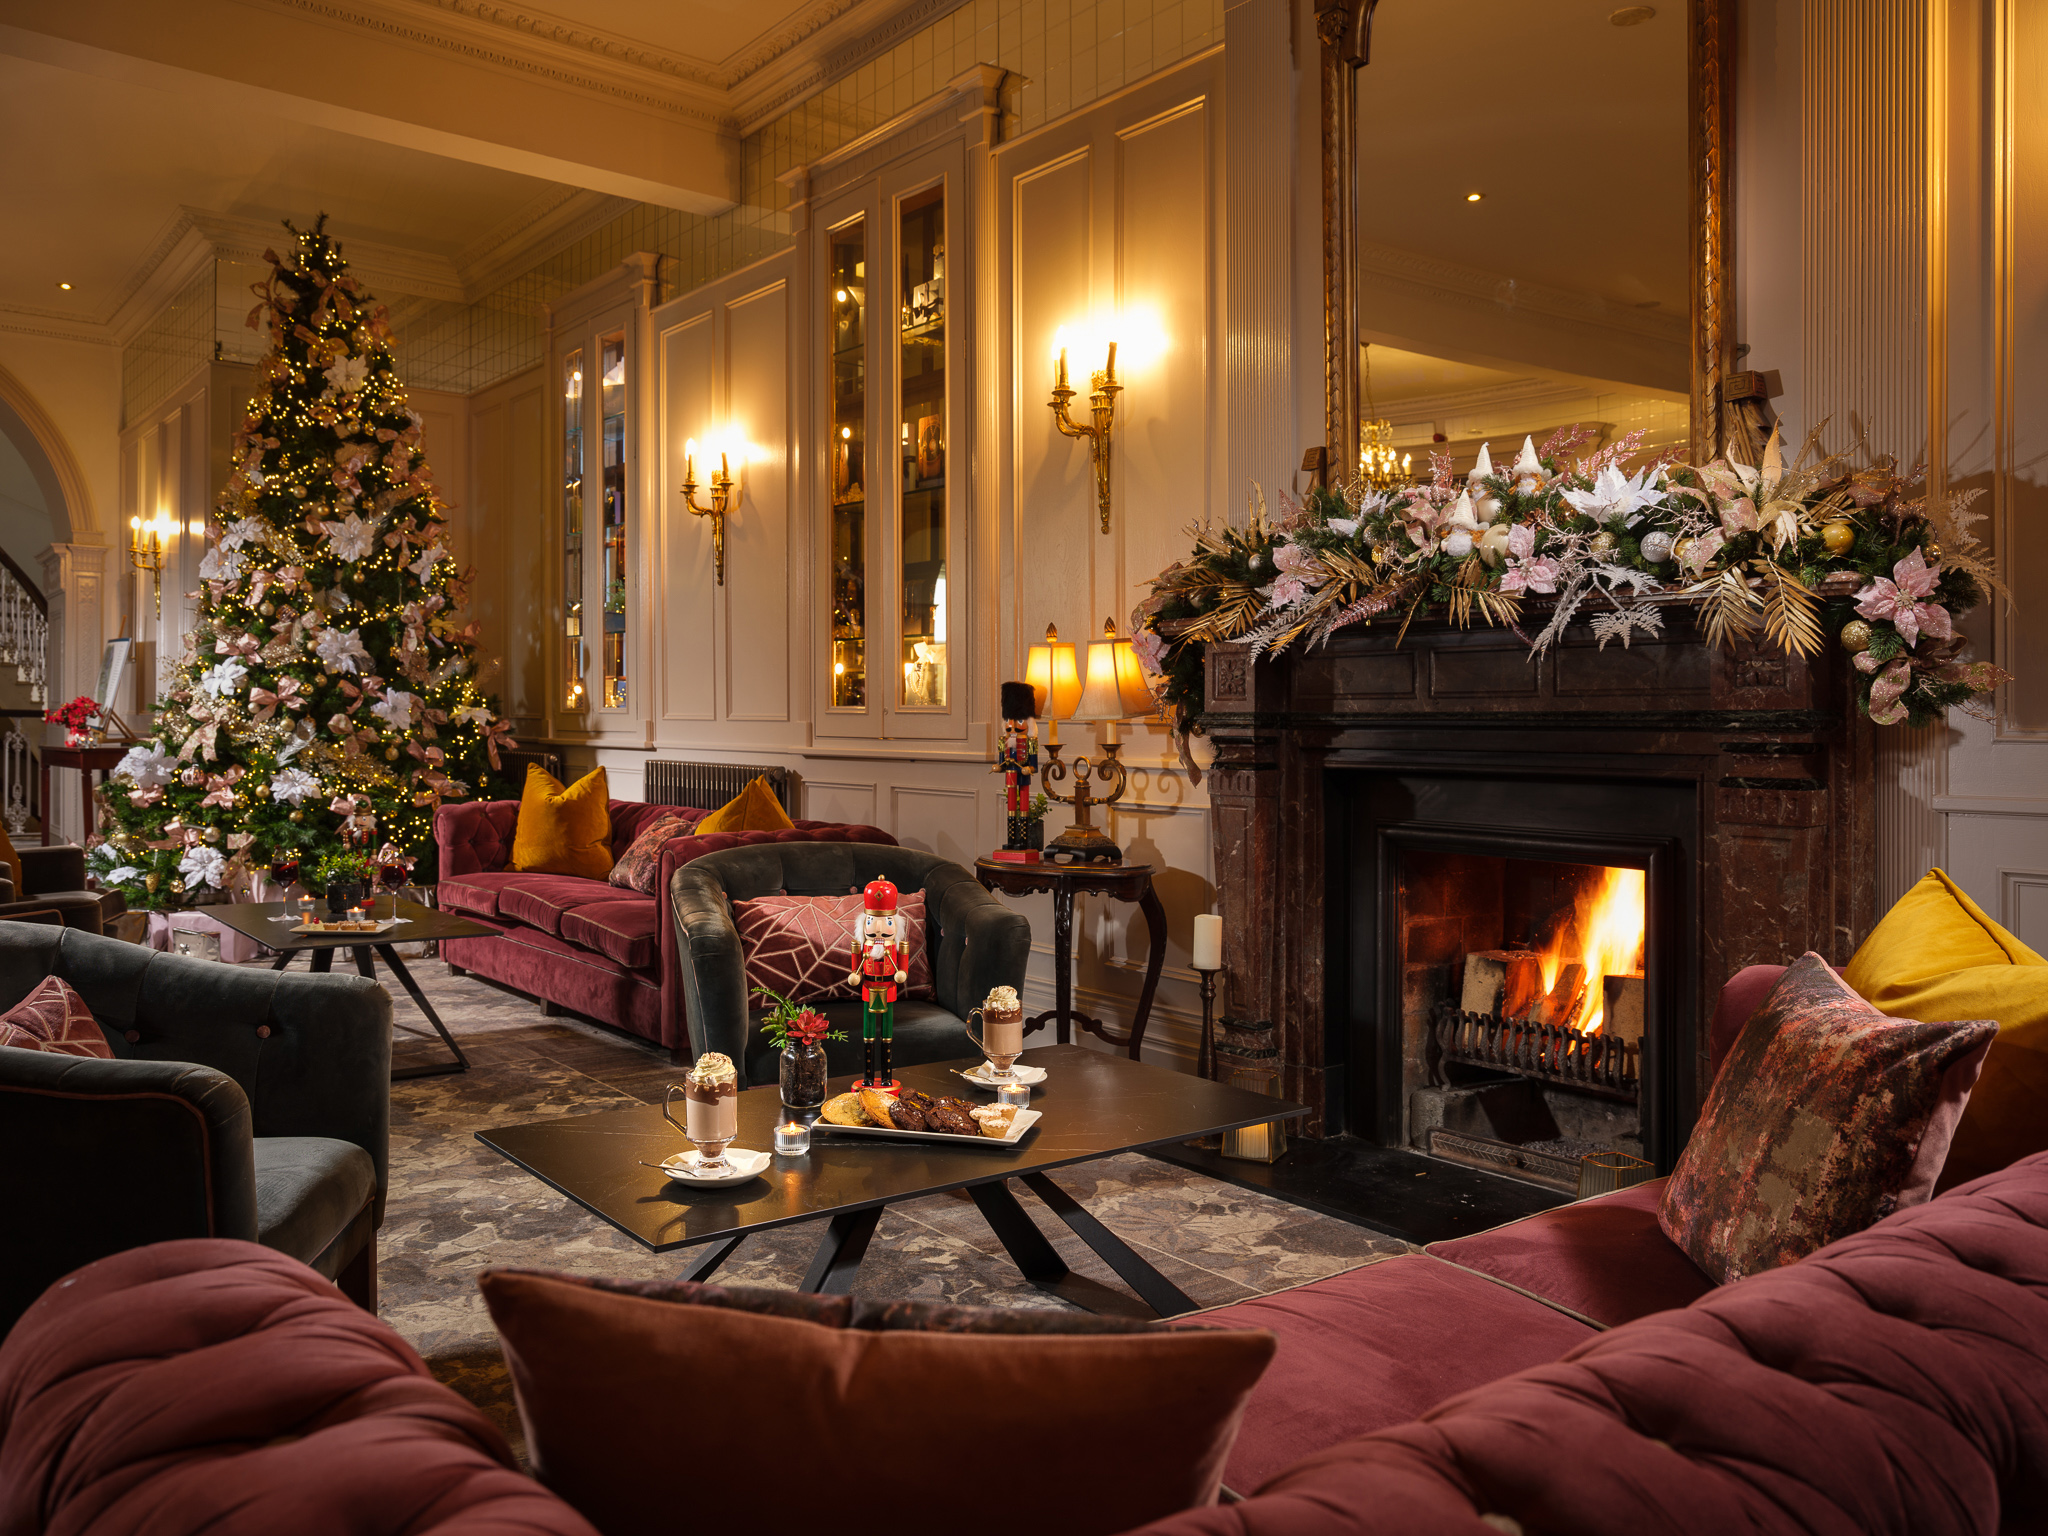 The Most Magical Time Of The Year – Christmas and New Year’s Eve Celebrations at Killashee